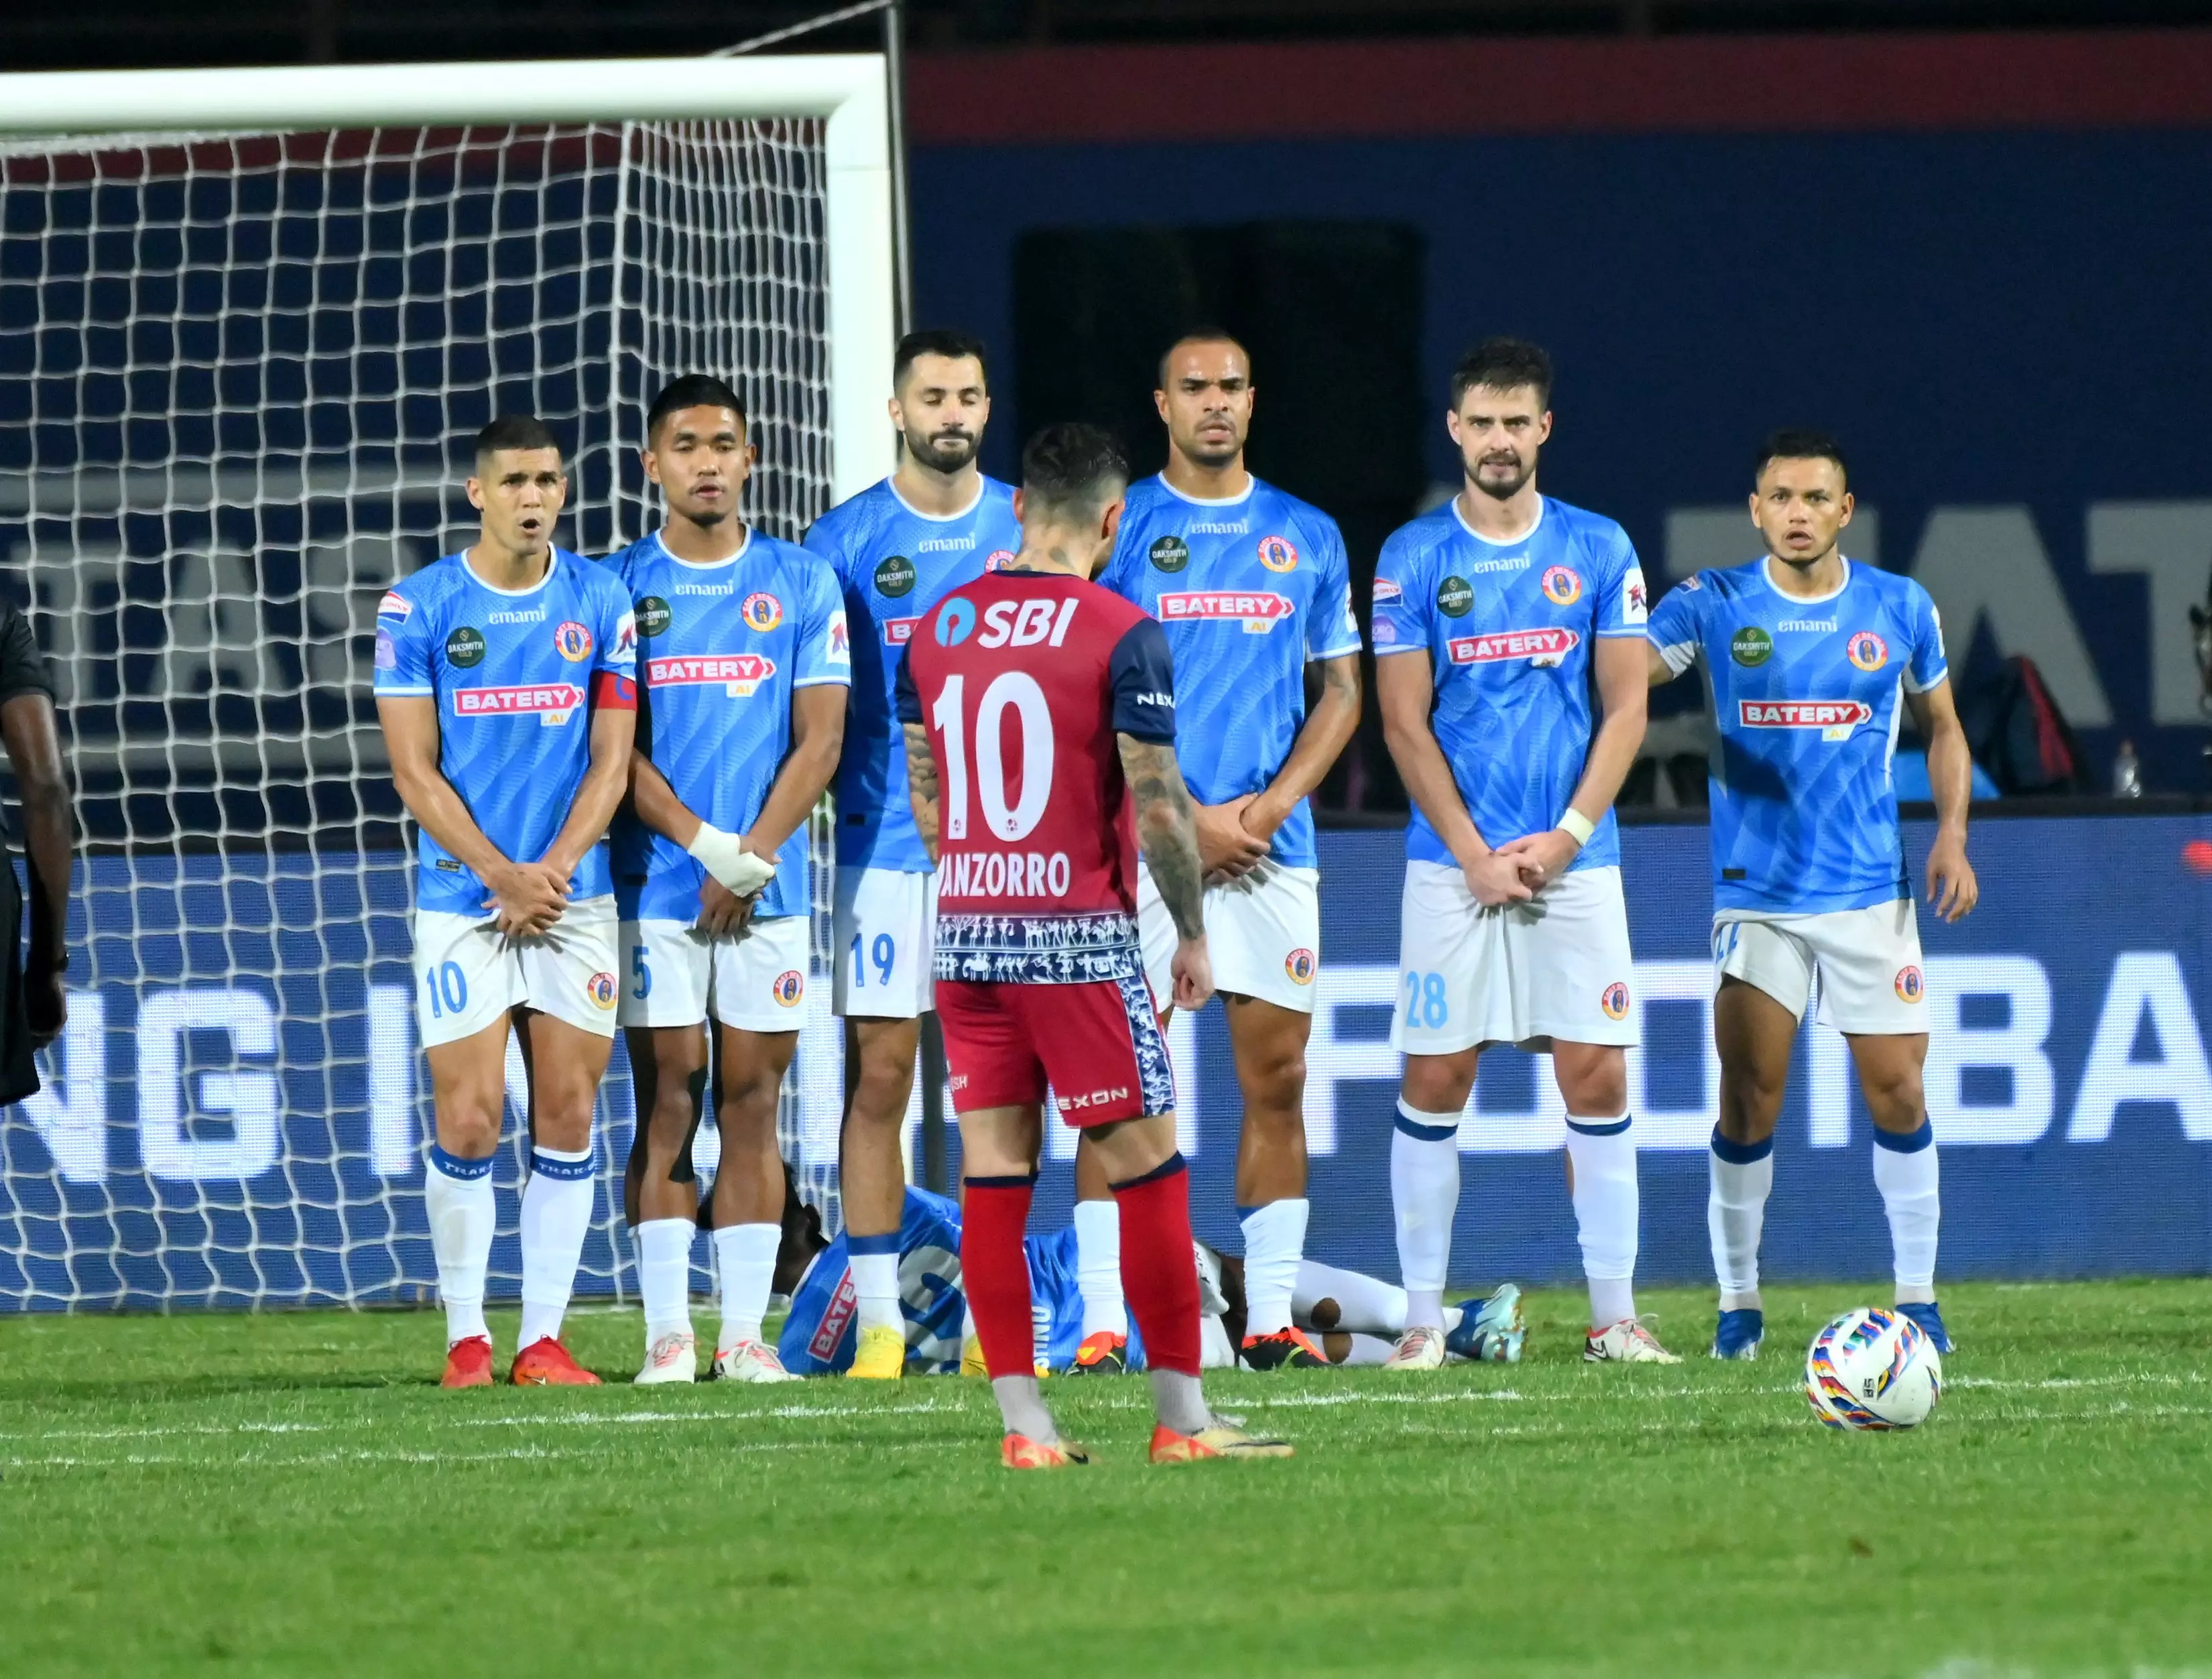 Jeremy Manzorro gearing up for a free-kick against East Bengal (Photo credits: ISL Media)